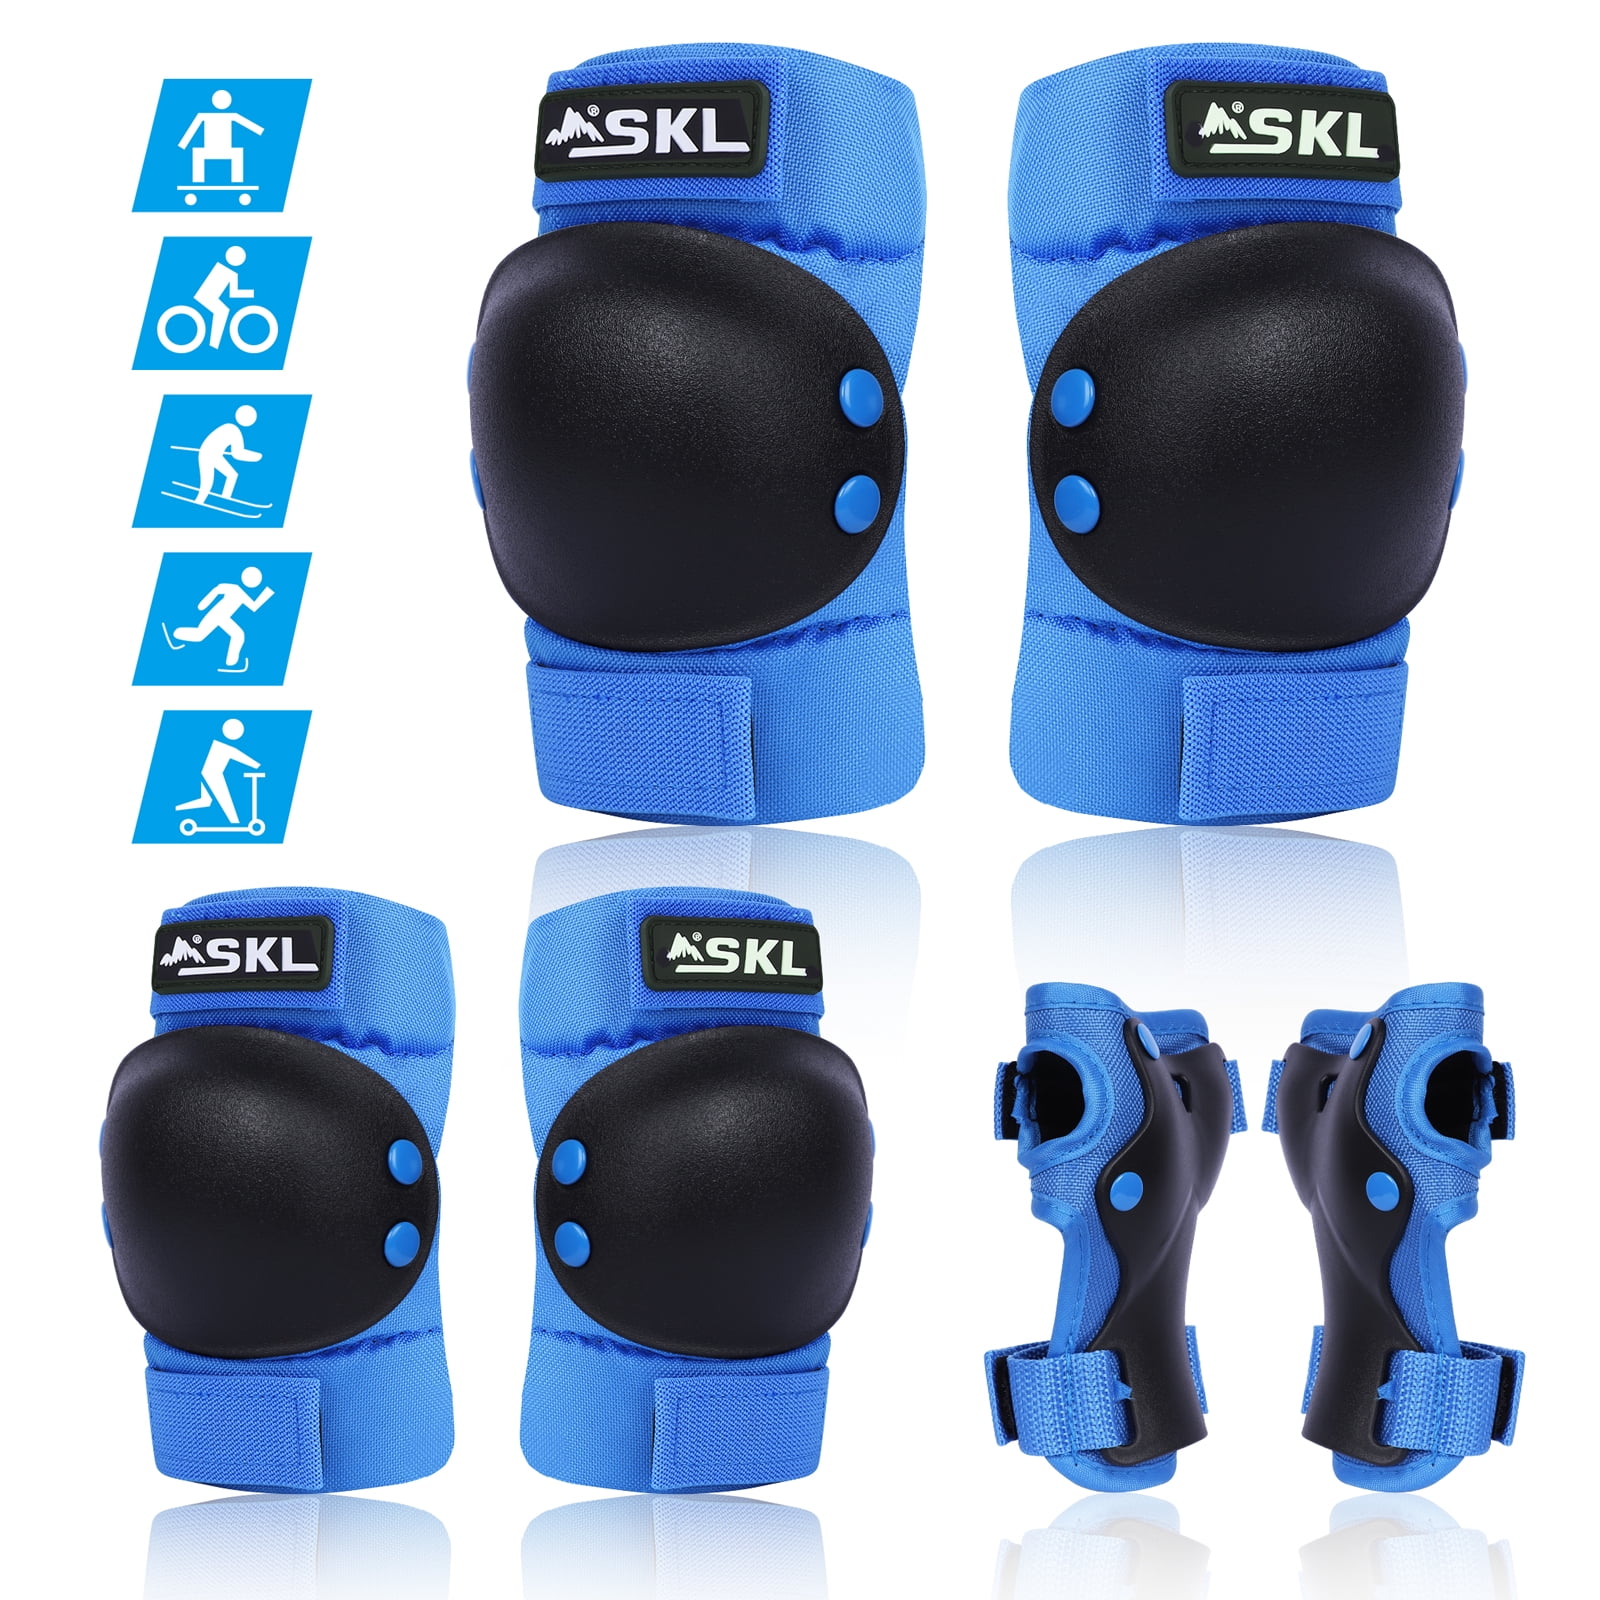 Kids Skiing Skating Riding Scooter Knee Elbow Wrist Protective Guard Gear Pad 